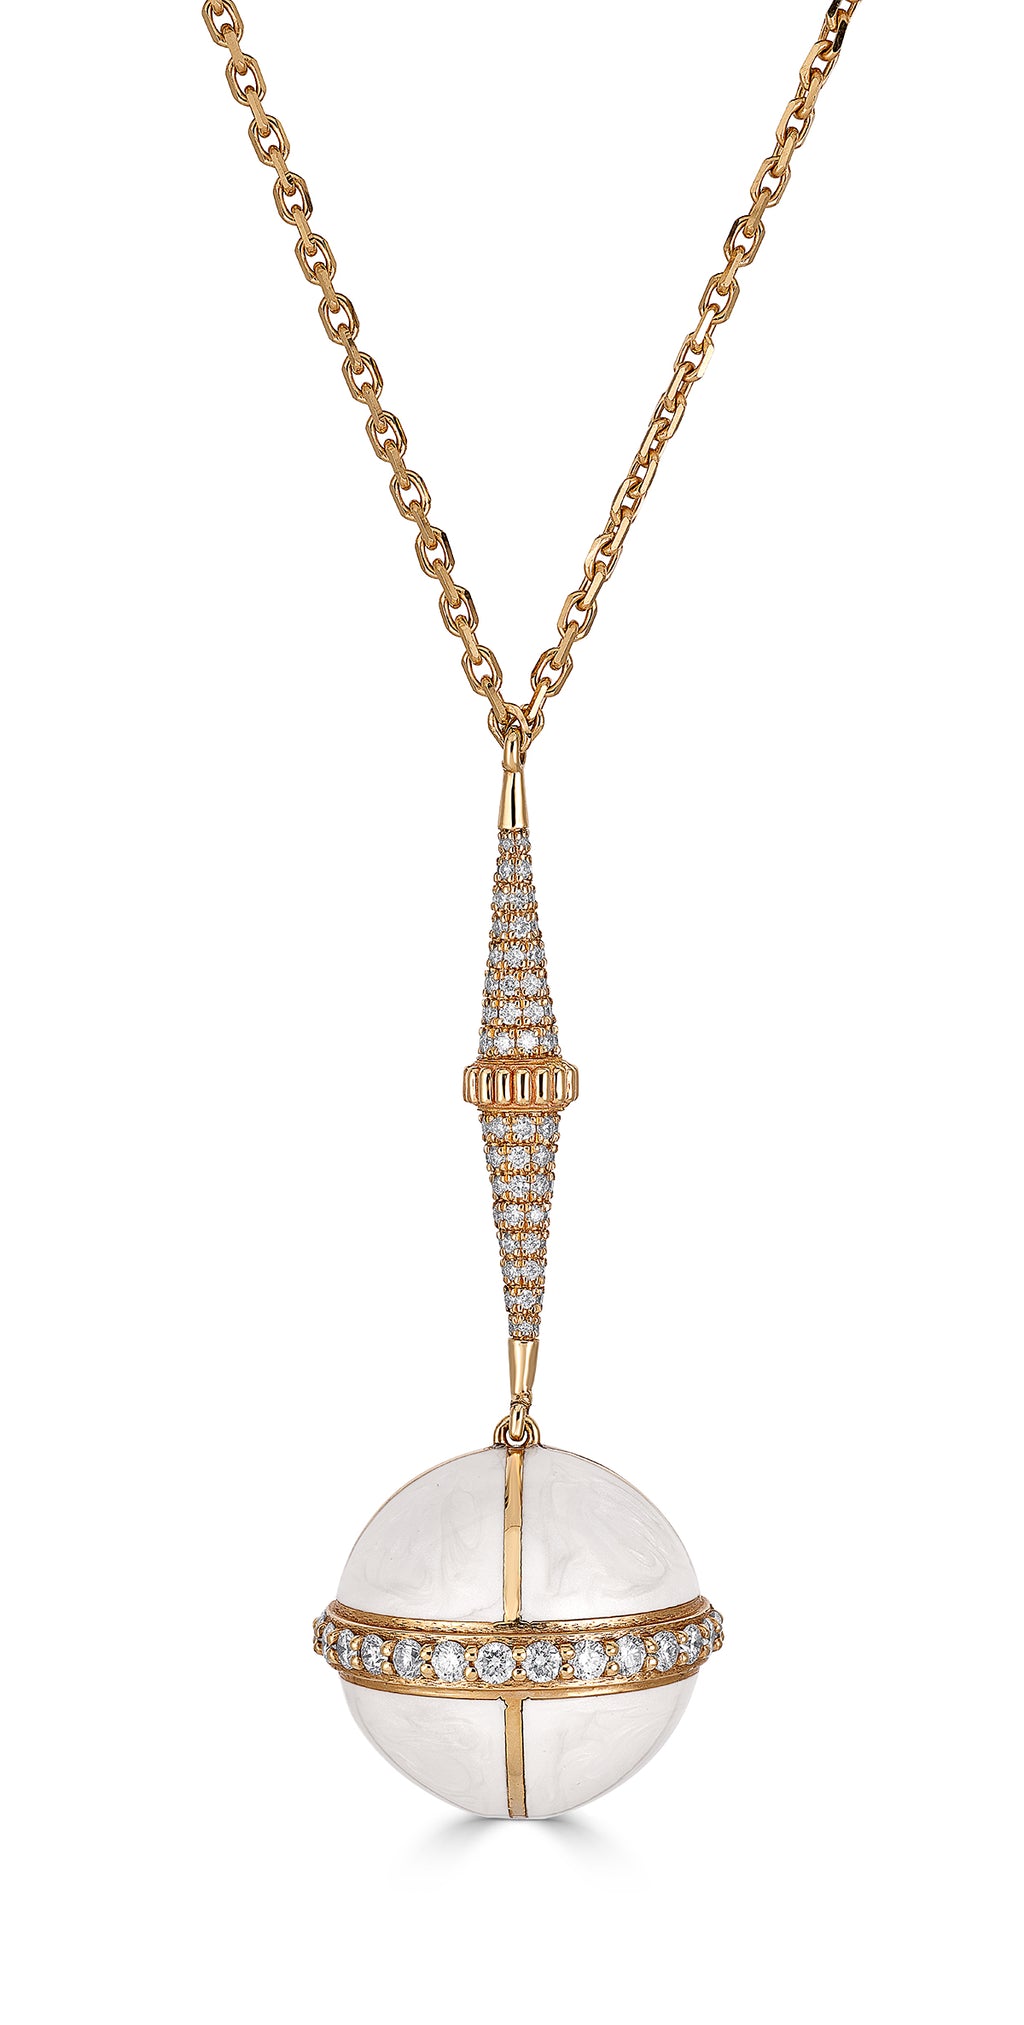 Large Rising Canopus Necklace with Diamonds